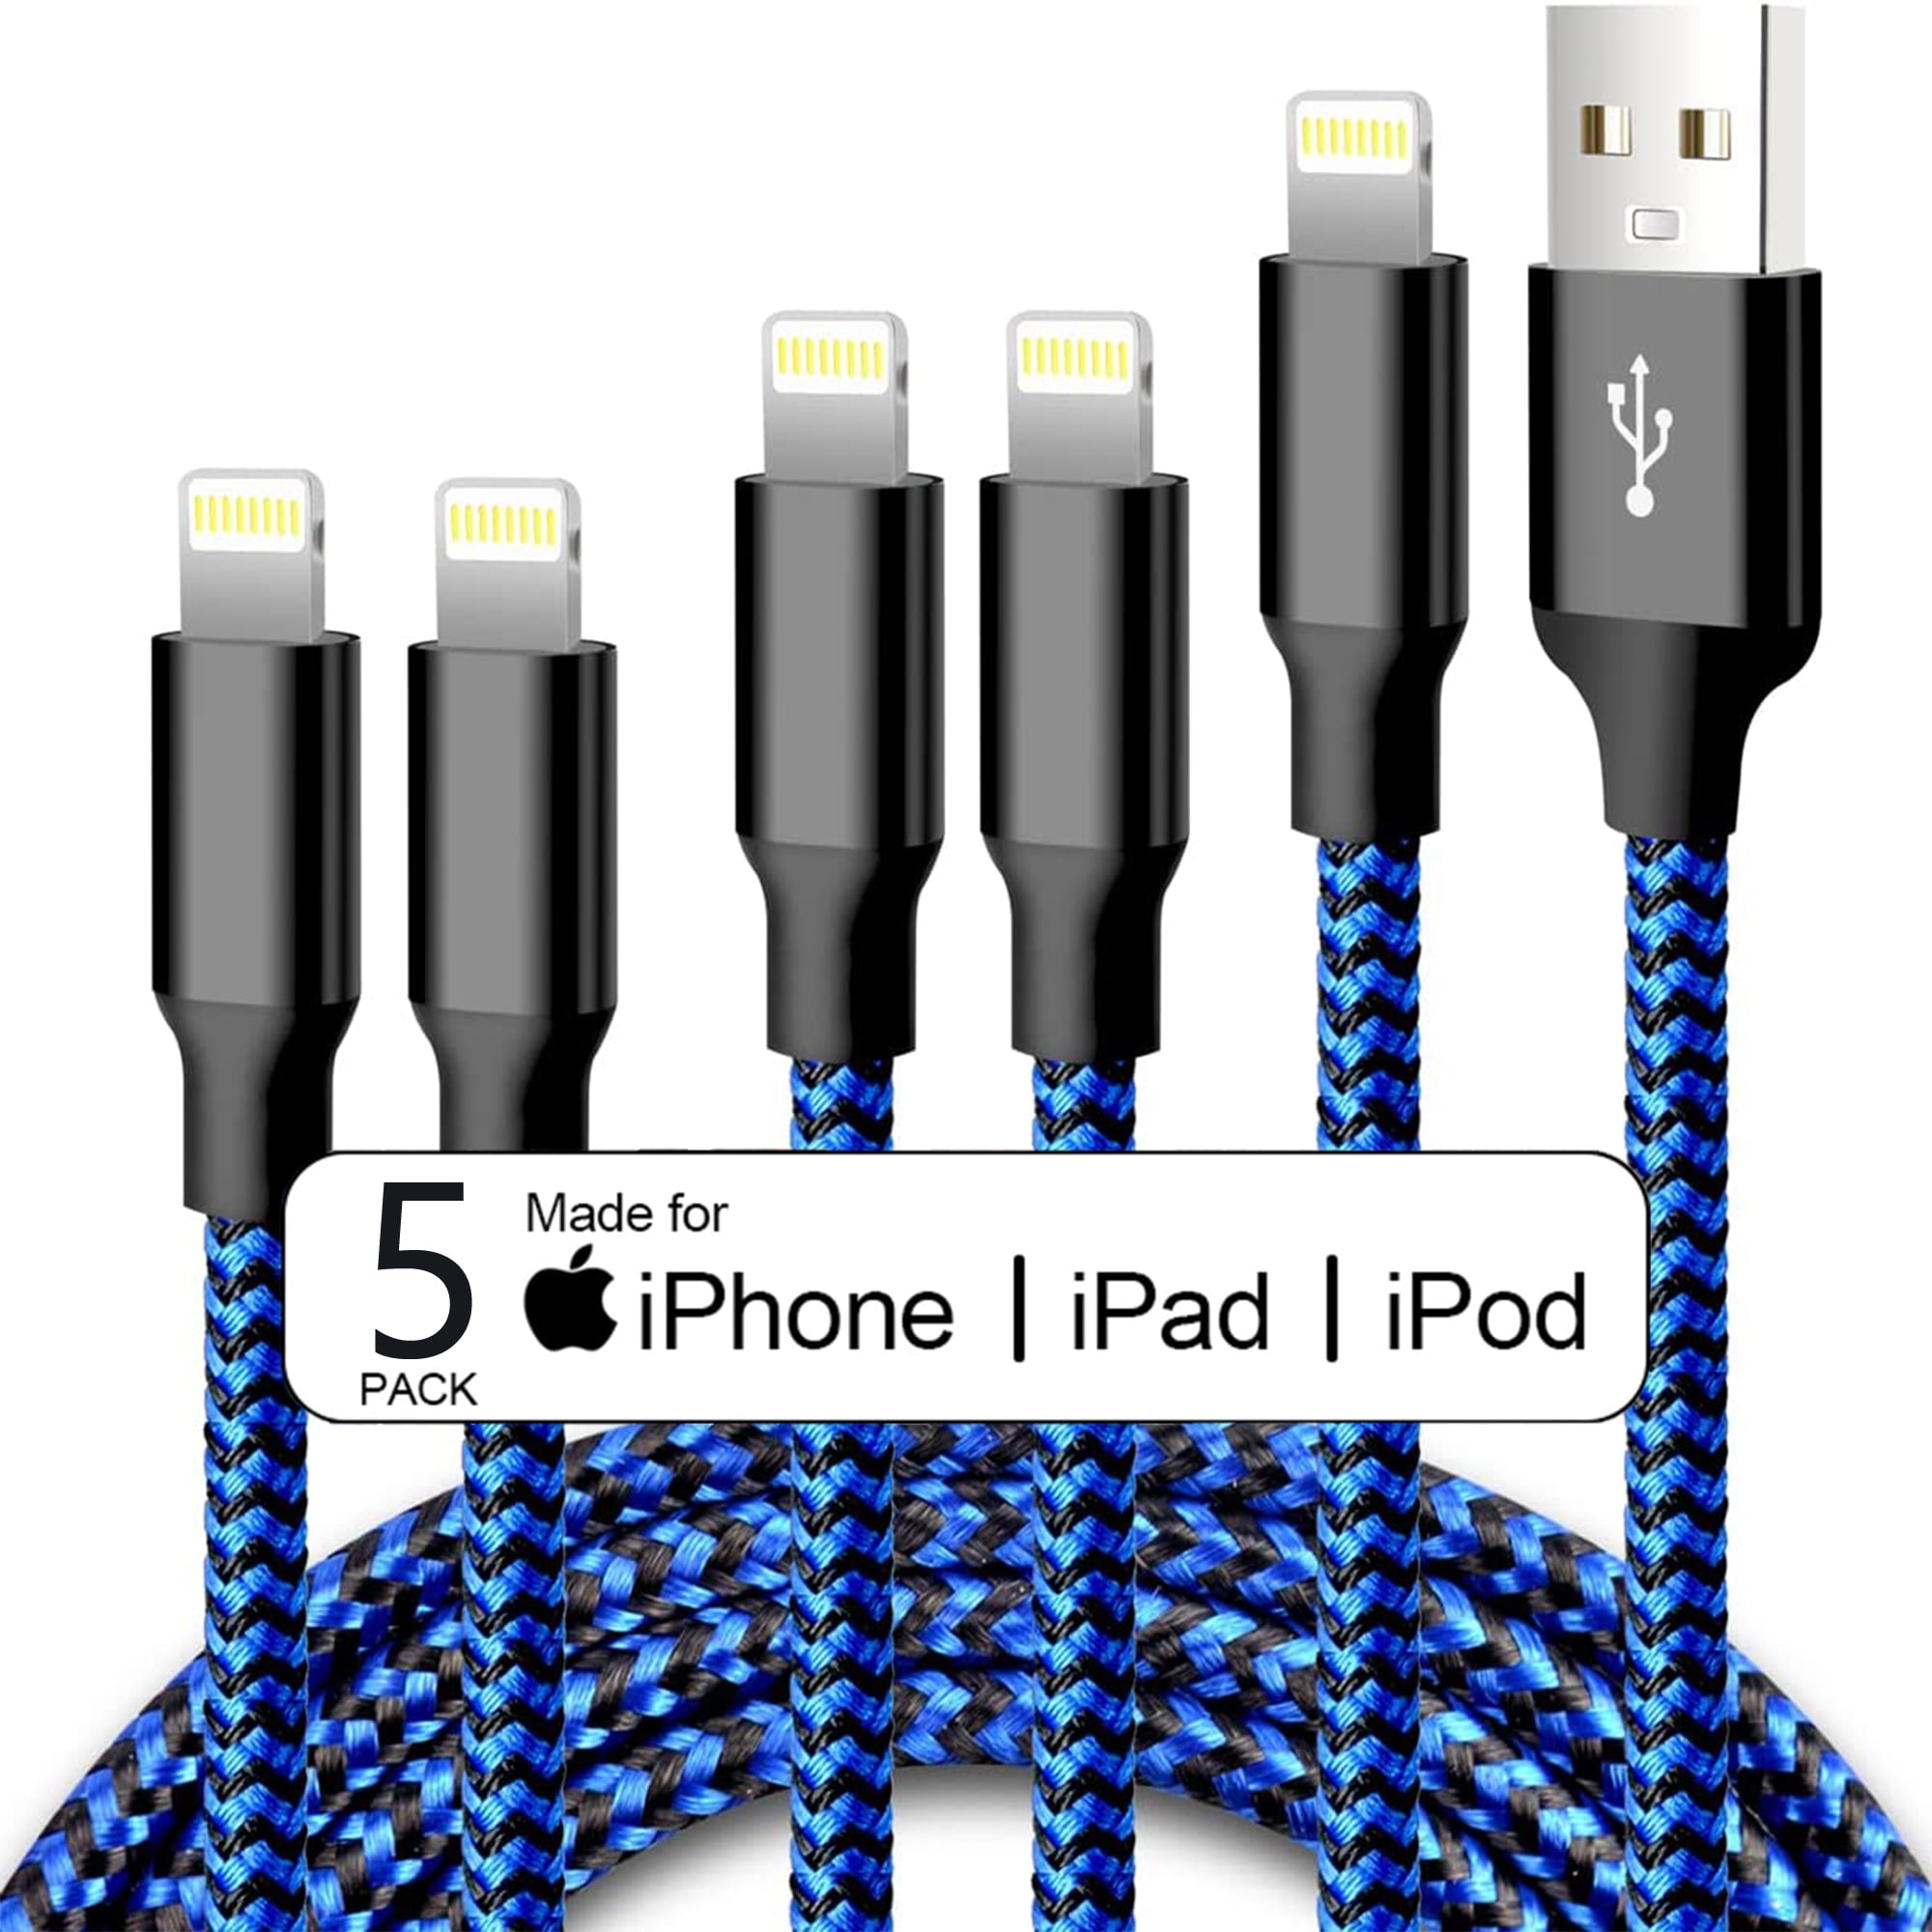 Fruit usb charger protector cable cargador For iphone kablo koruyucu cord  winder ochrona na kabel accessories kabel diertjes - Price history & Review, AliExpress Seller - Shop5000155 Store